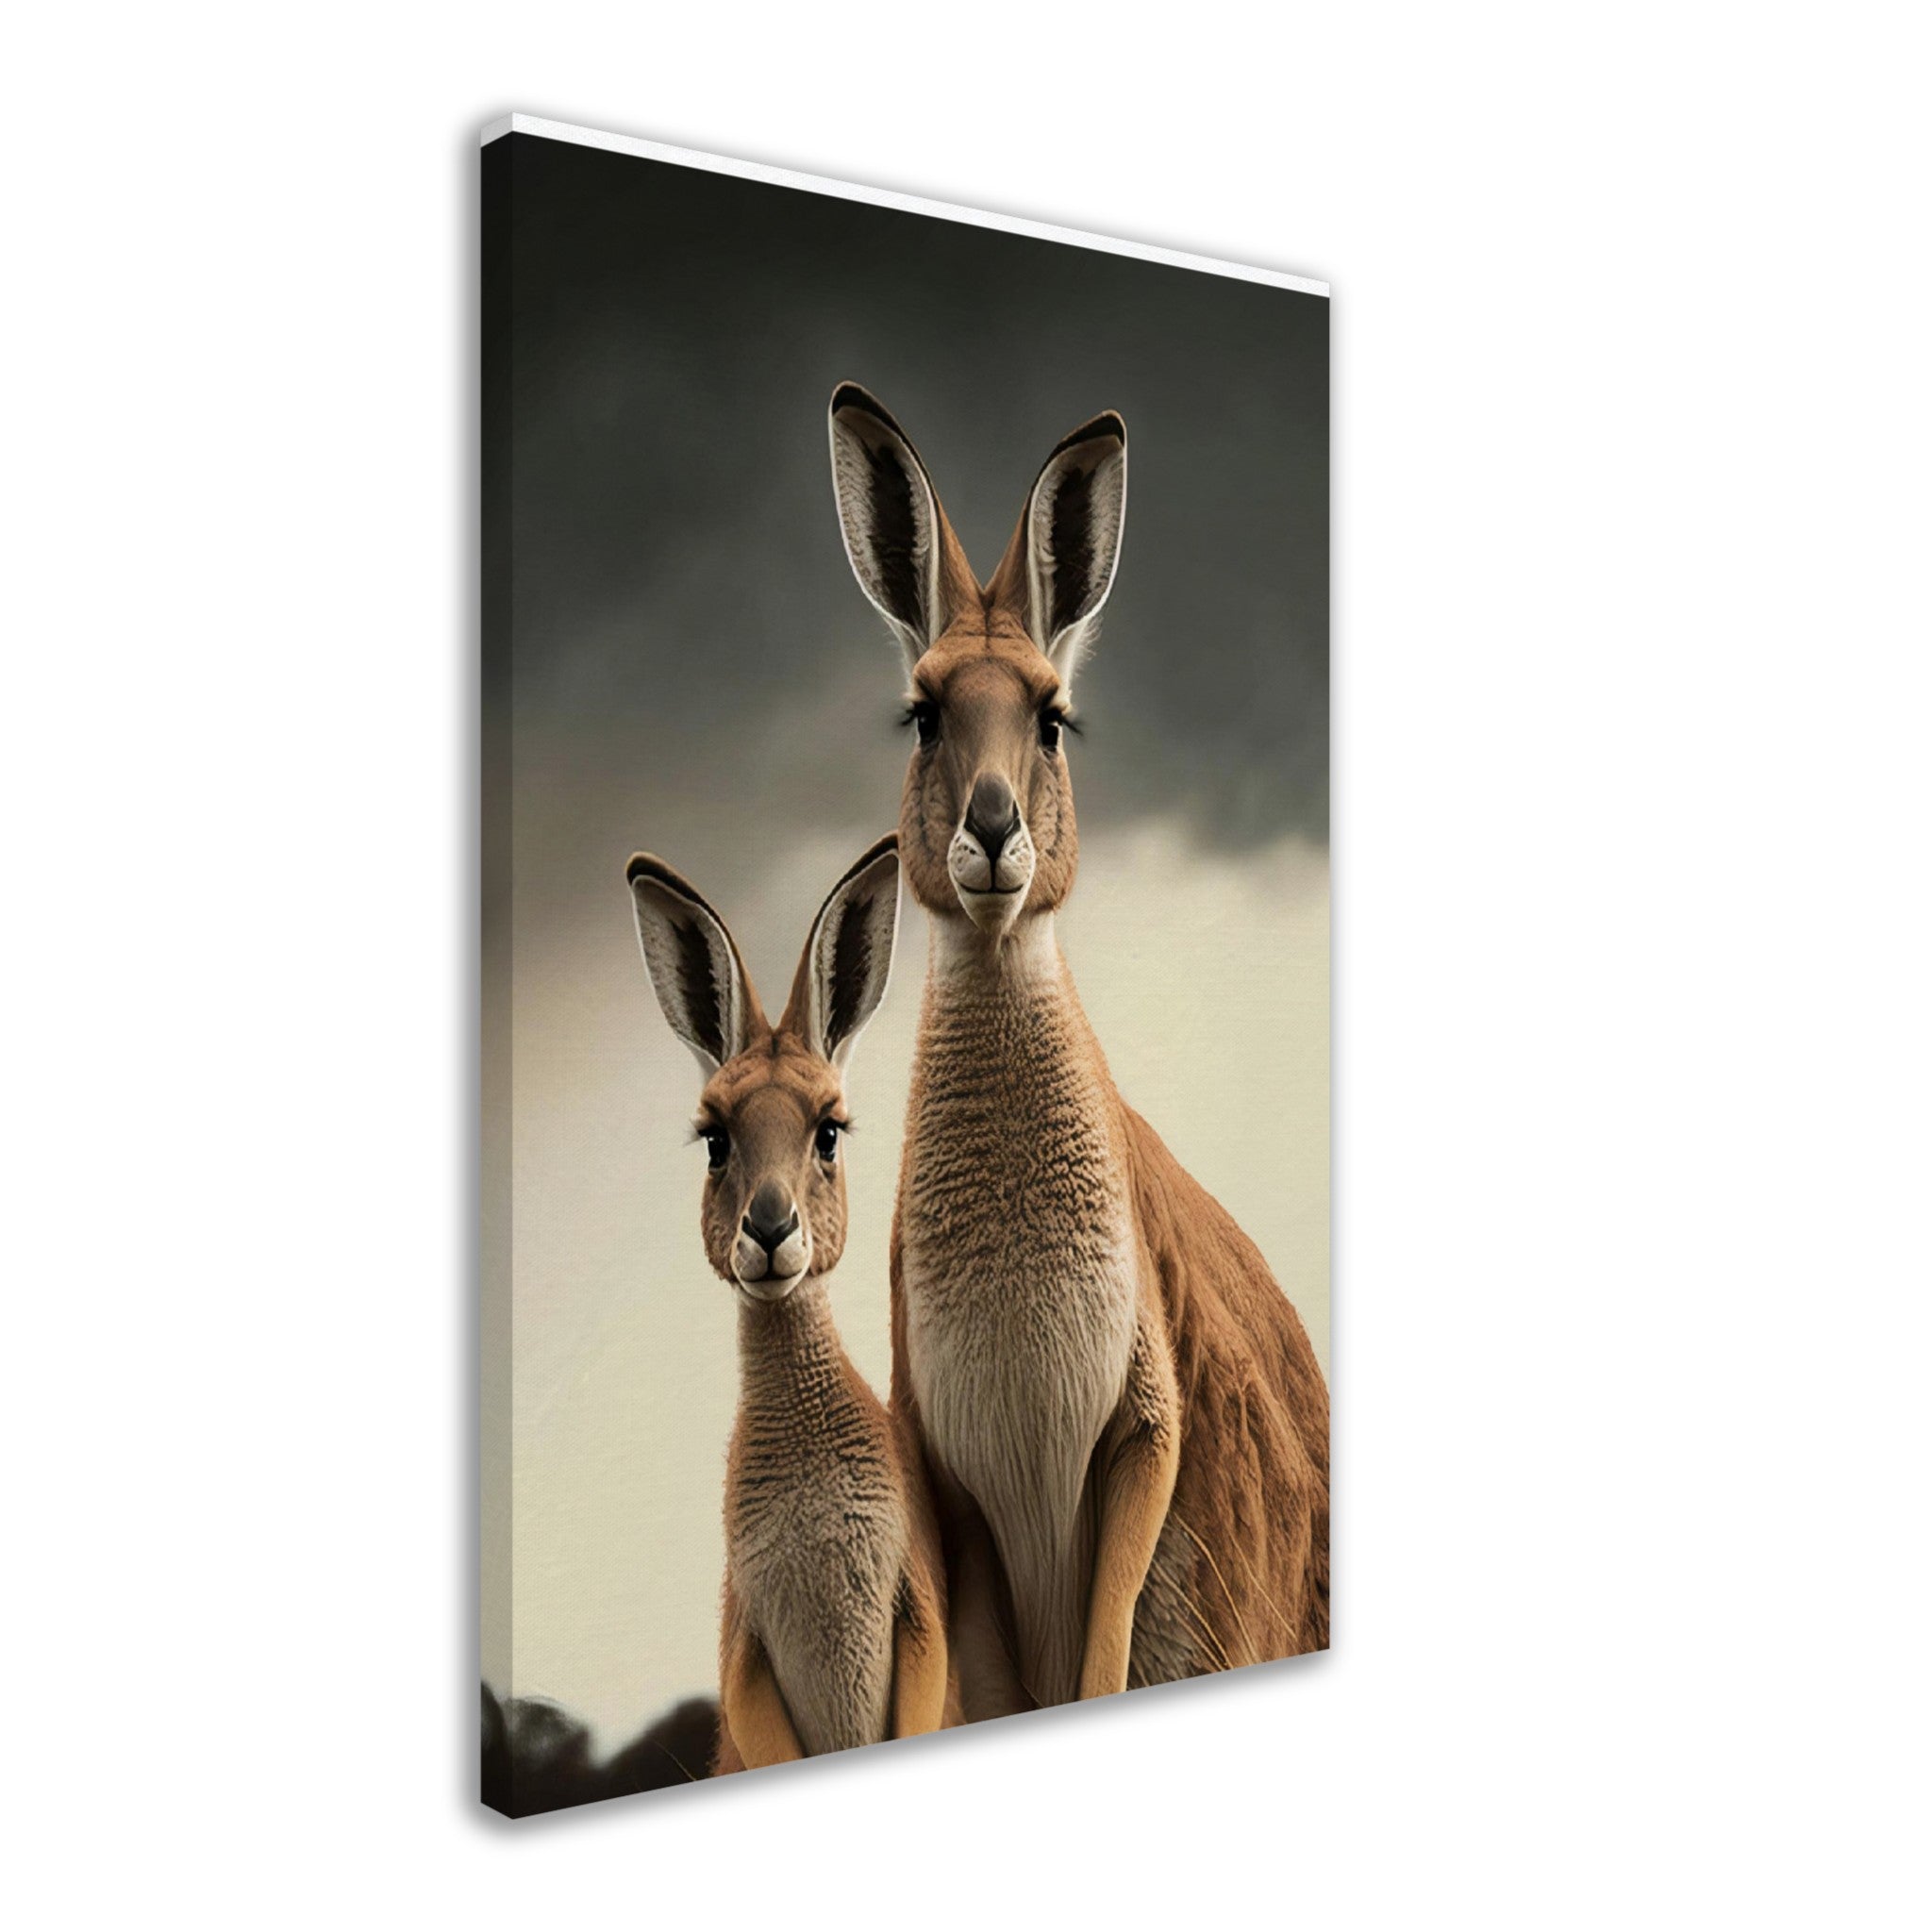 Two Kangaroos On Grassland On Canvas - immersiarts